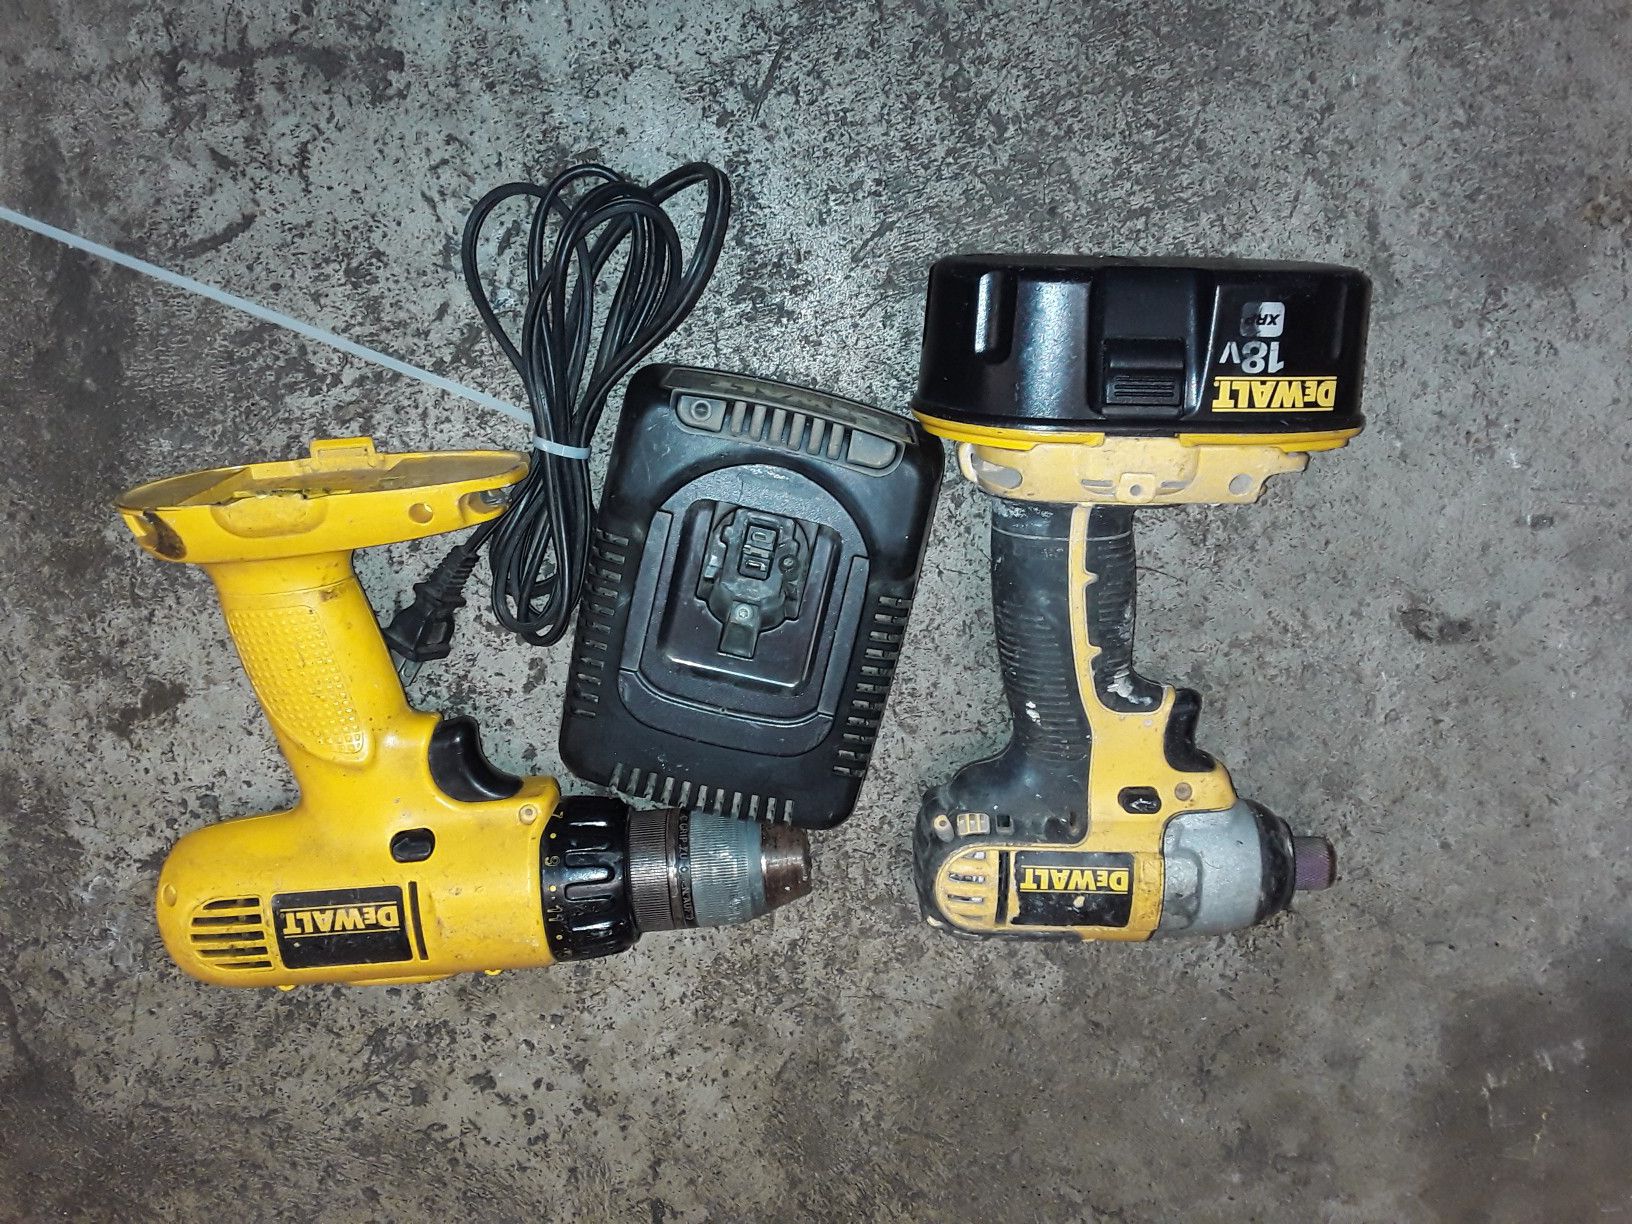 Dewalt impact and regular drill for sale works good price firm